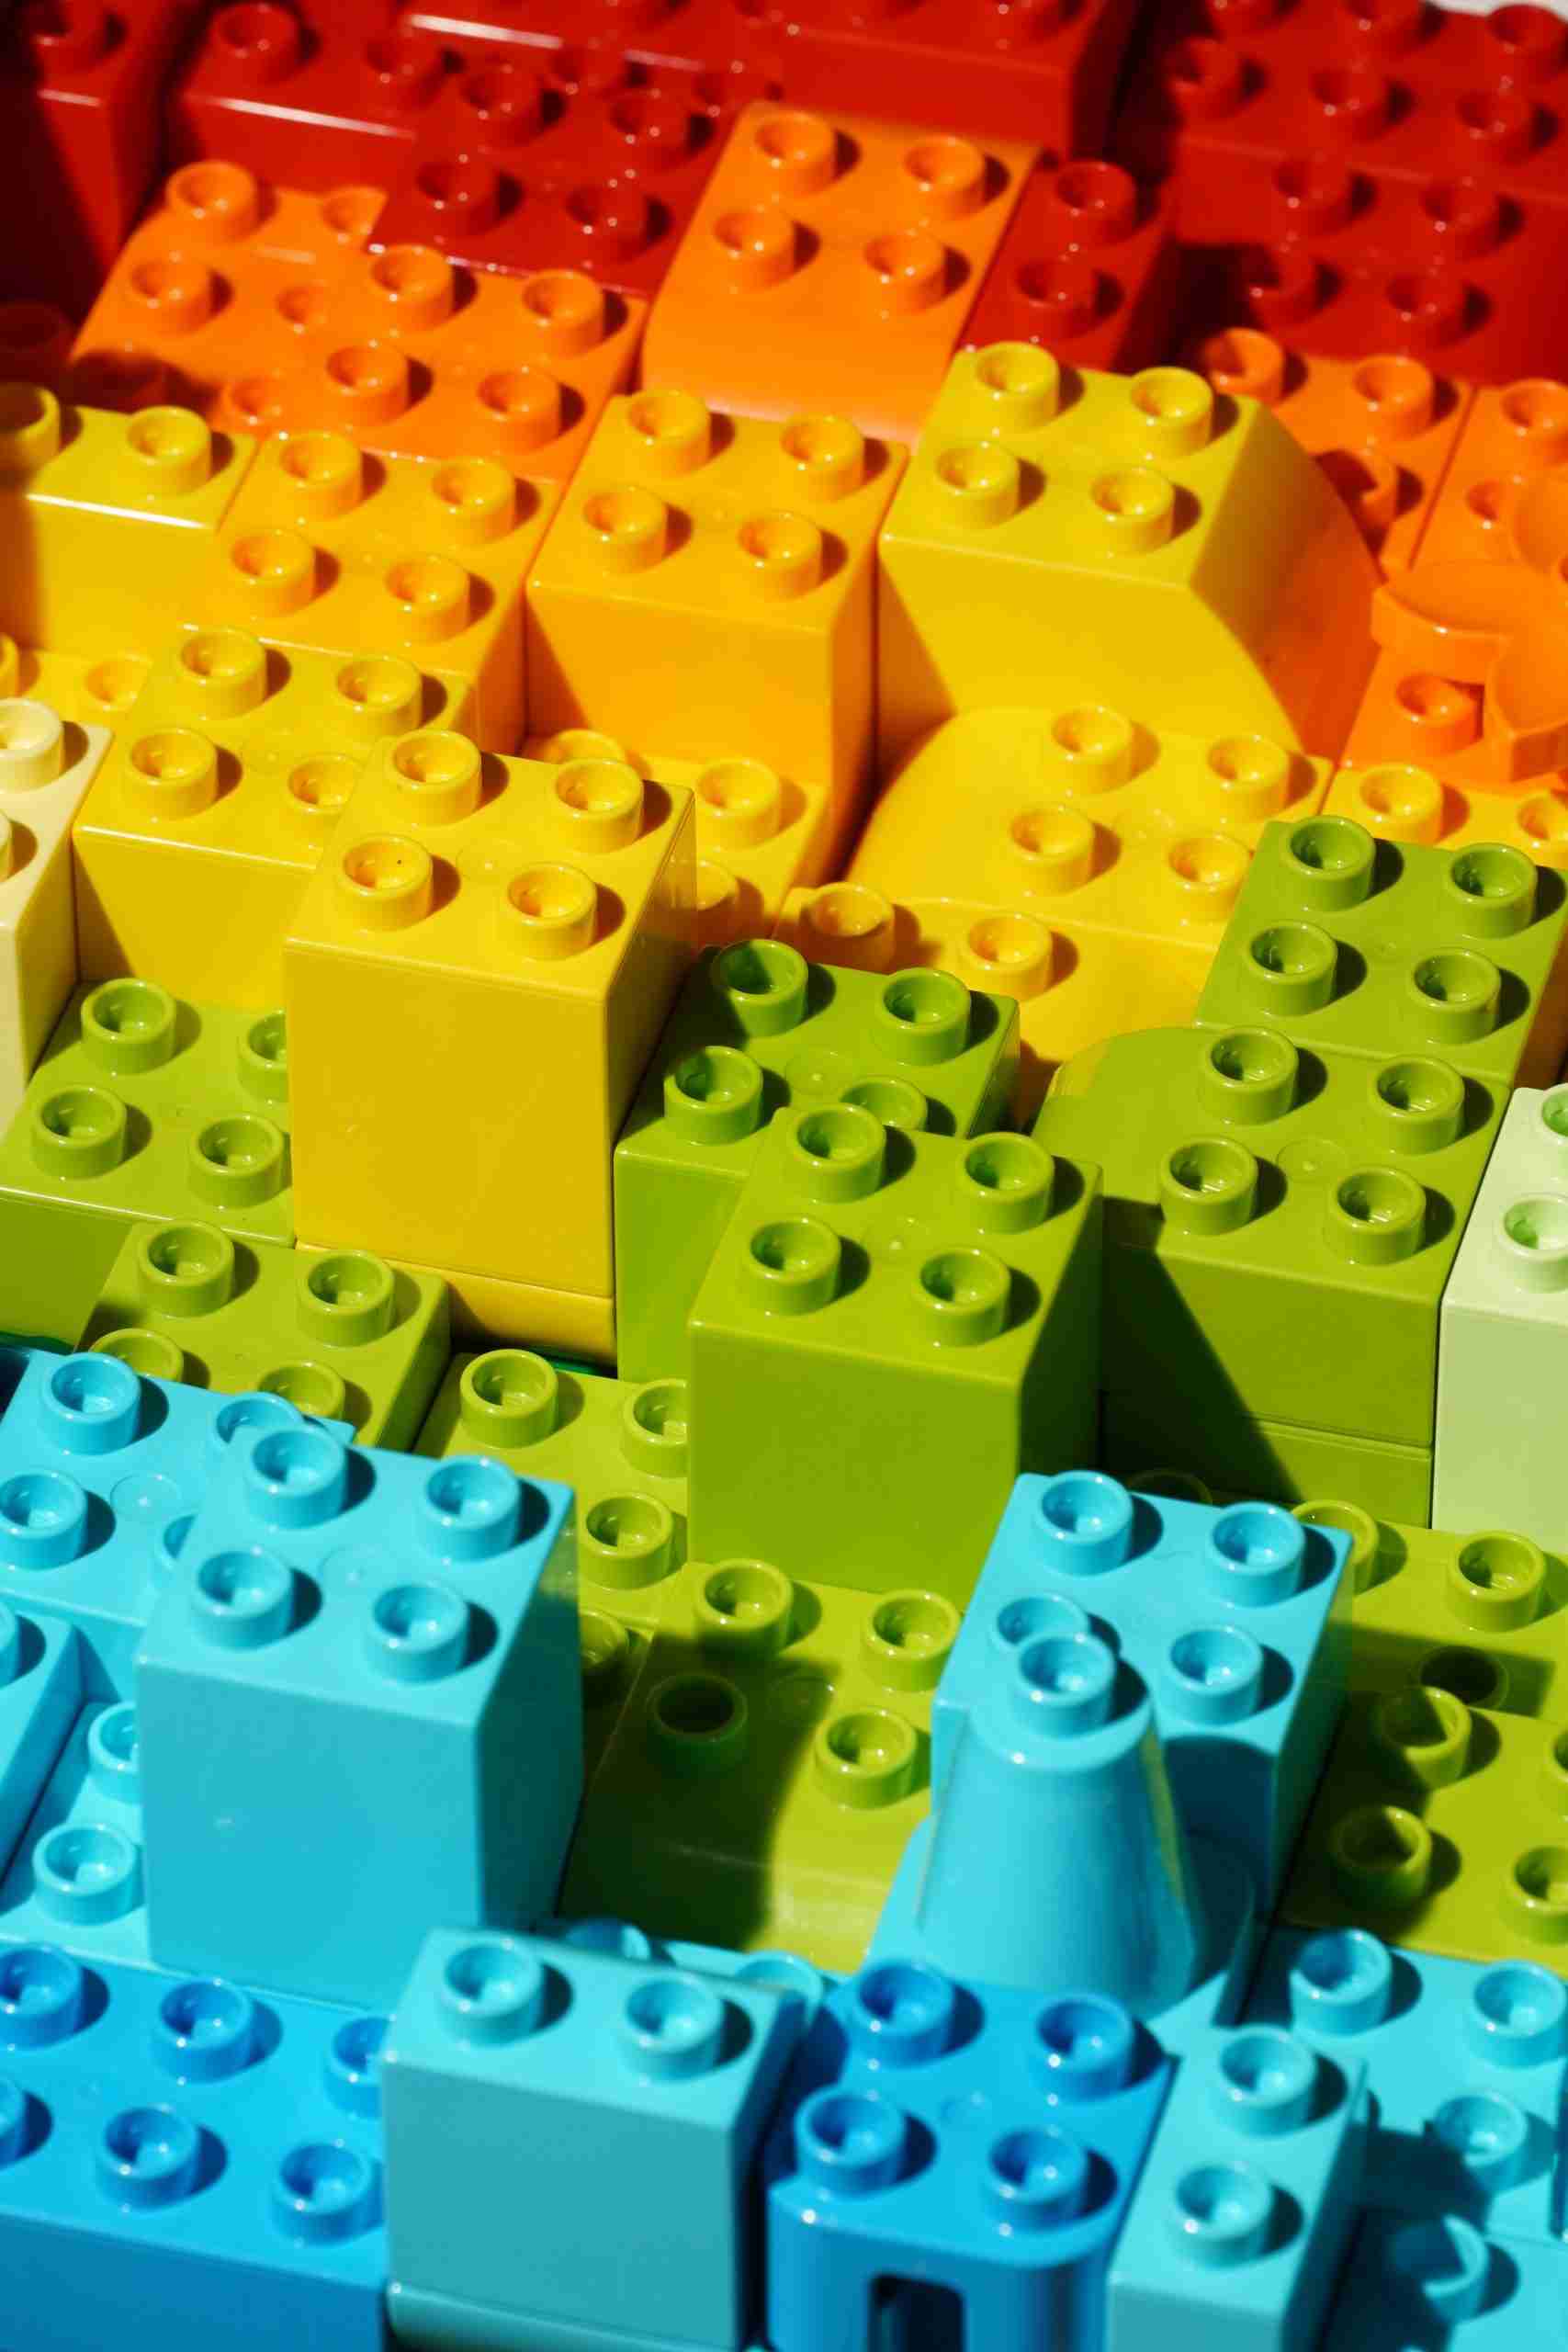 An image of Duplo Blocks representing how you must test and experiment as part of your  Business Strategy